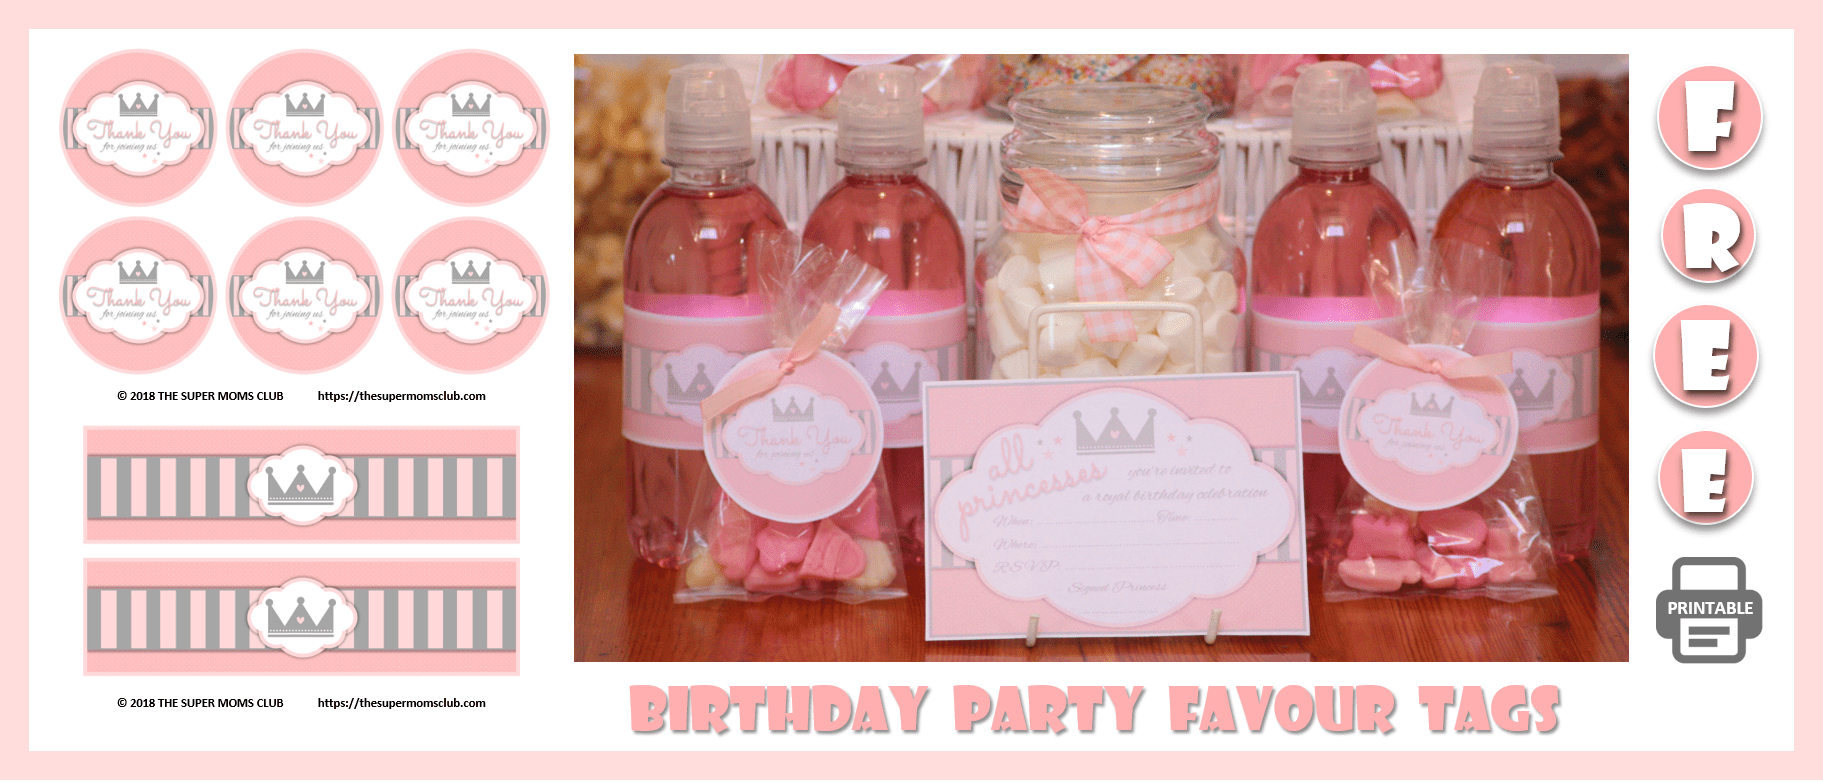 Princess Themed Birthday Party FREE PRINTABLE Favour Tags - The Super Moms Club